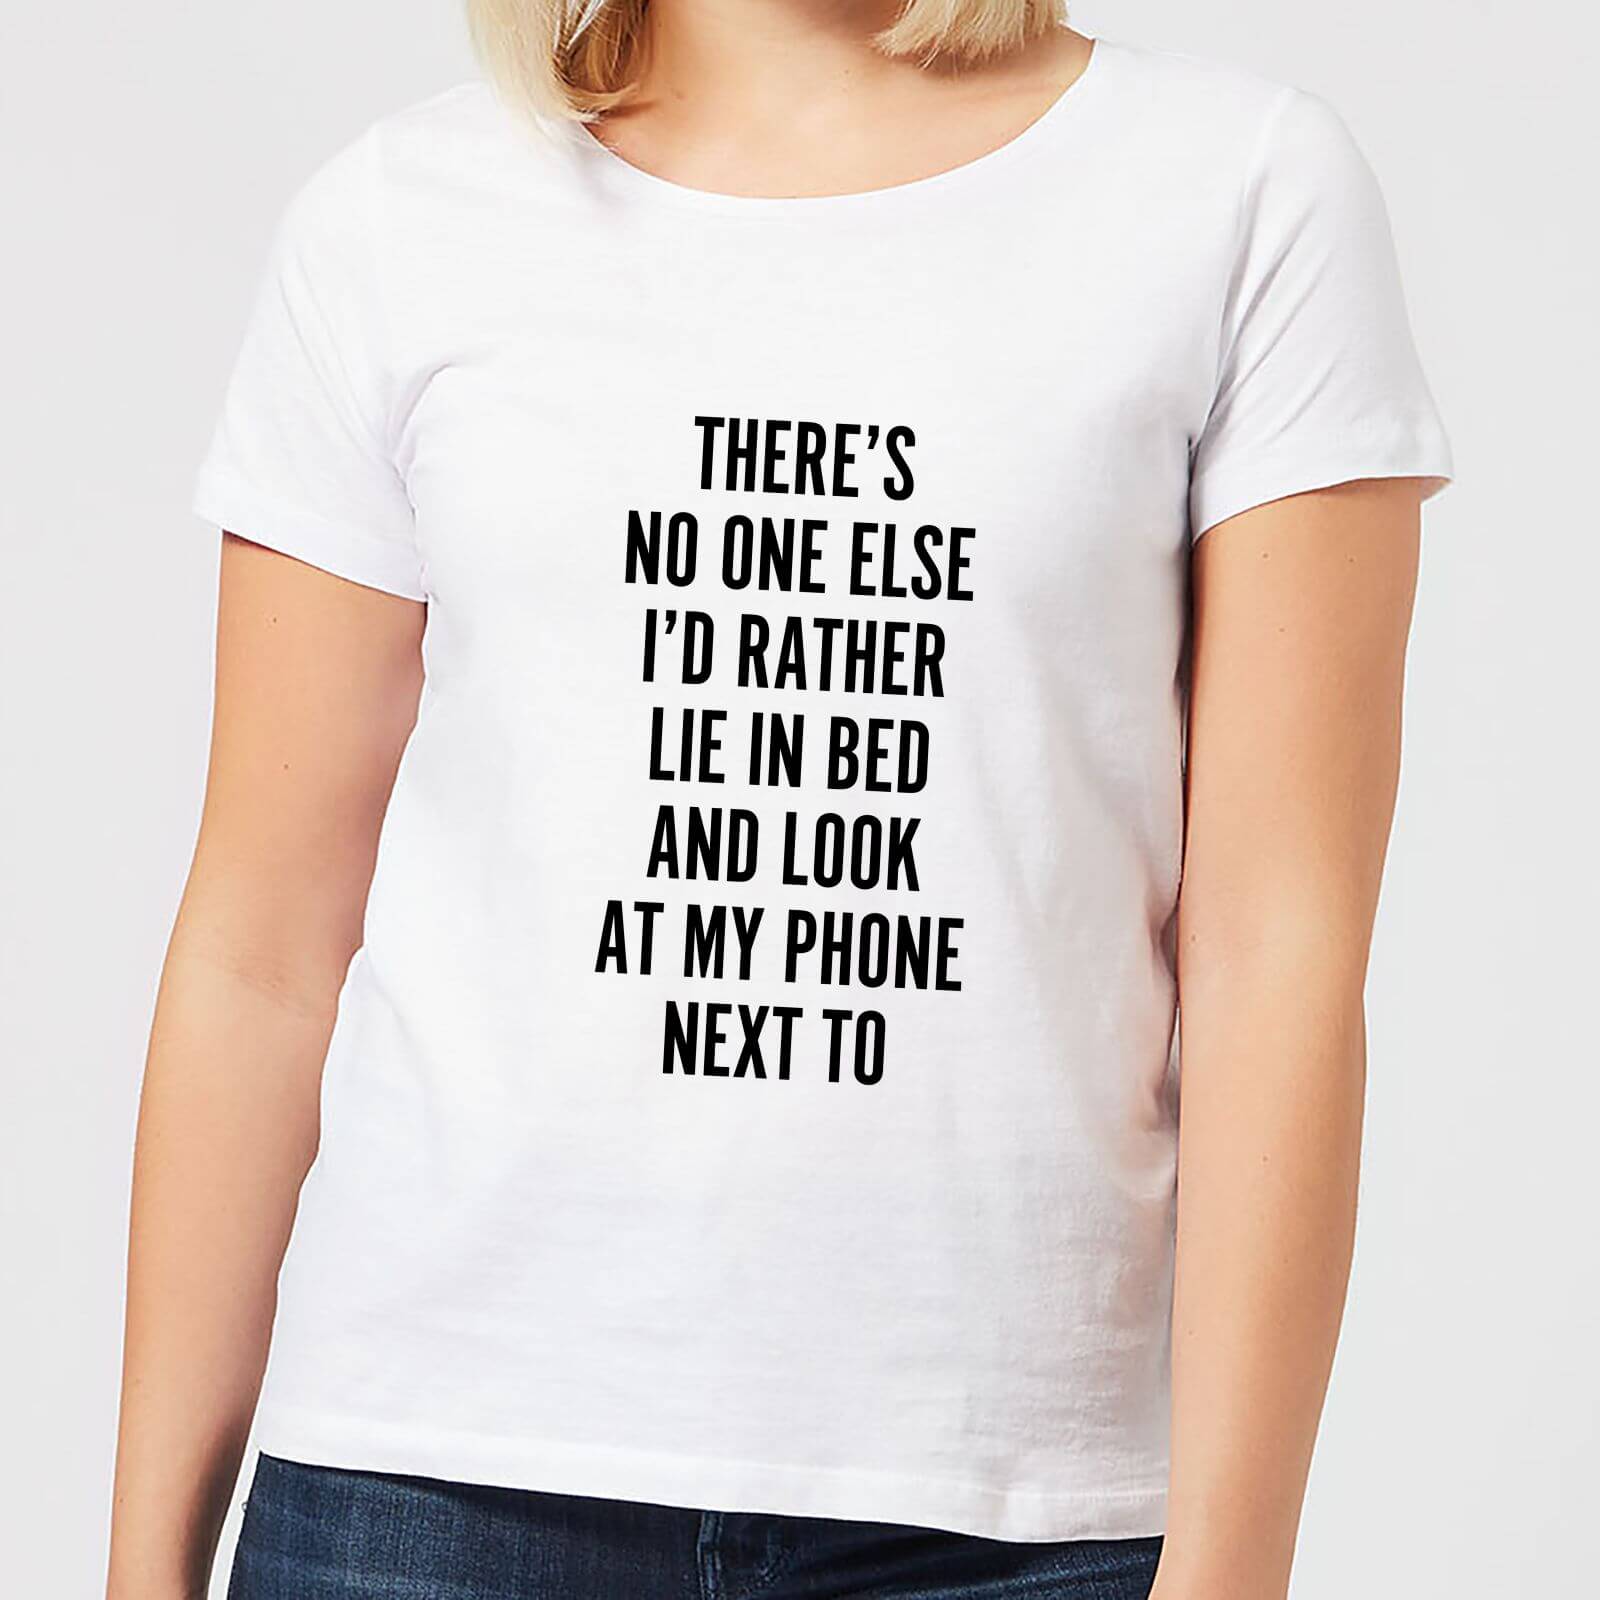 There's No One Else... Women's T-Shirt - White - S - White